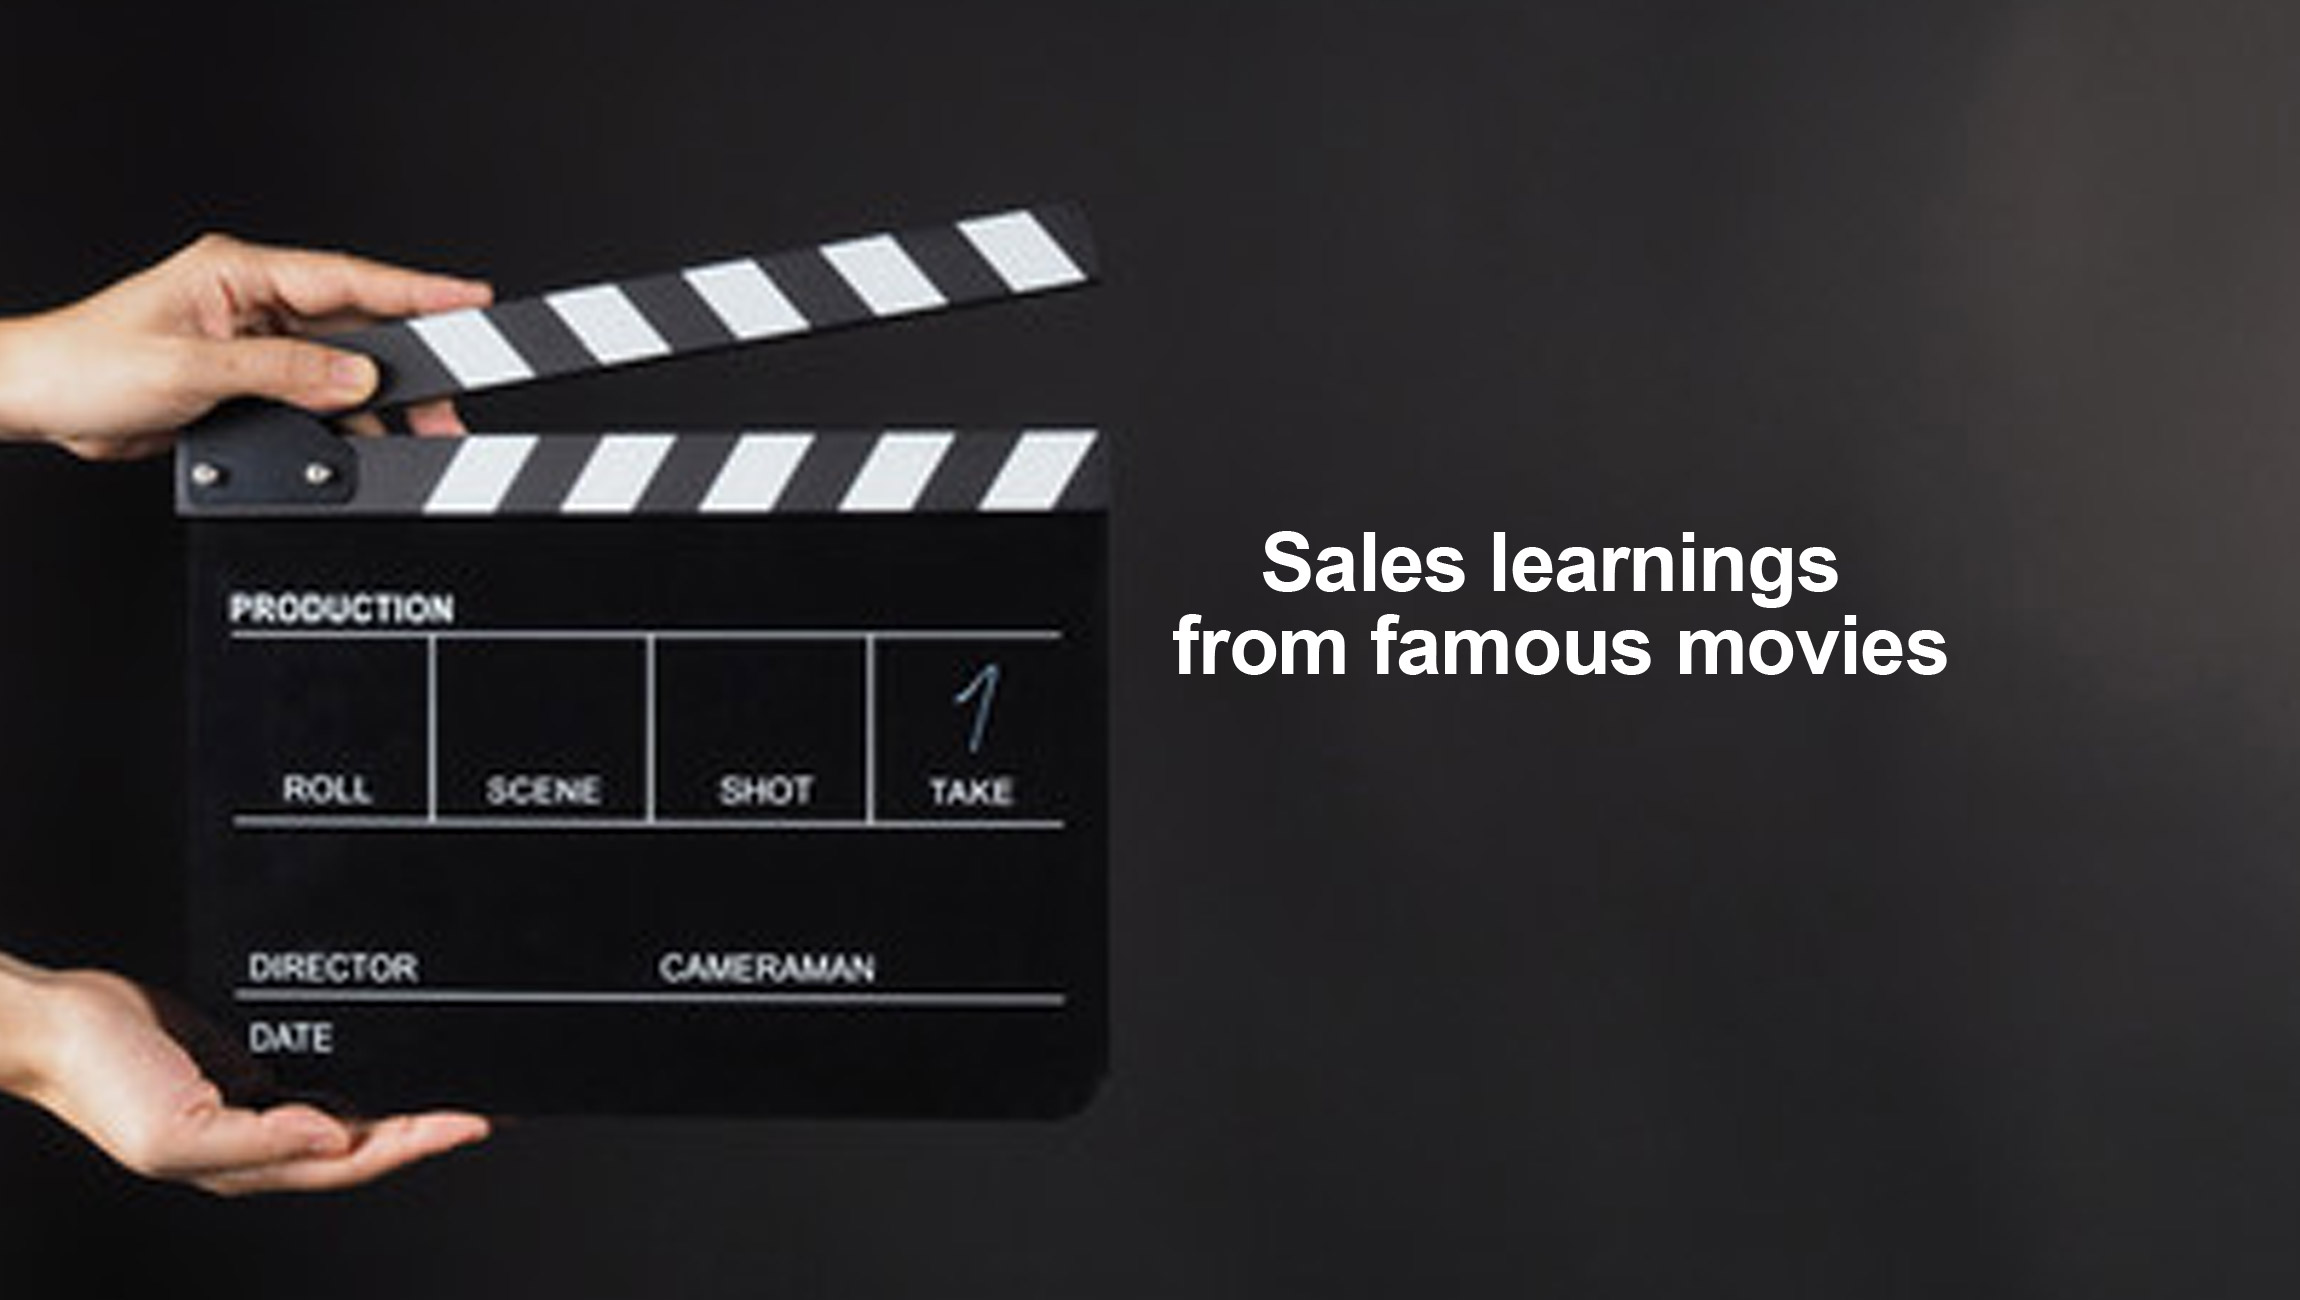 5 Biggest Sales Learnings from These Top Blockbuster Movies